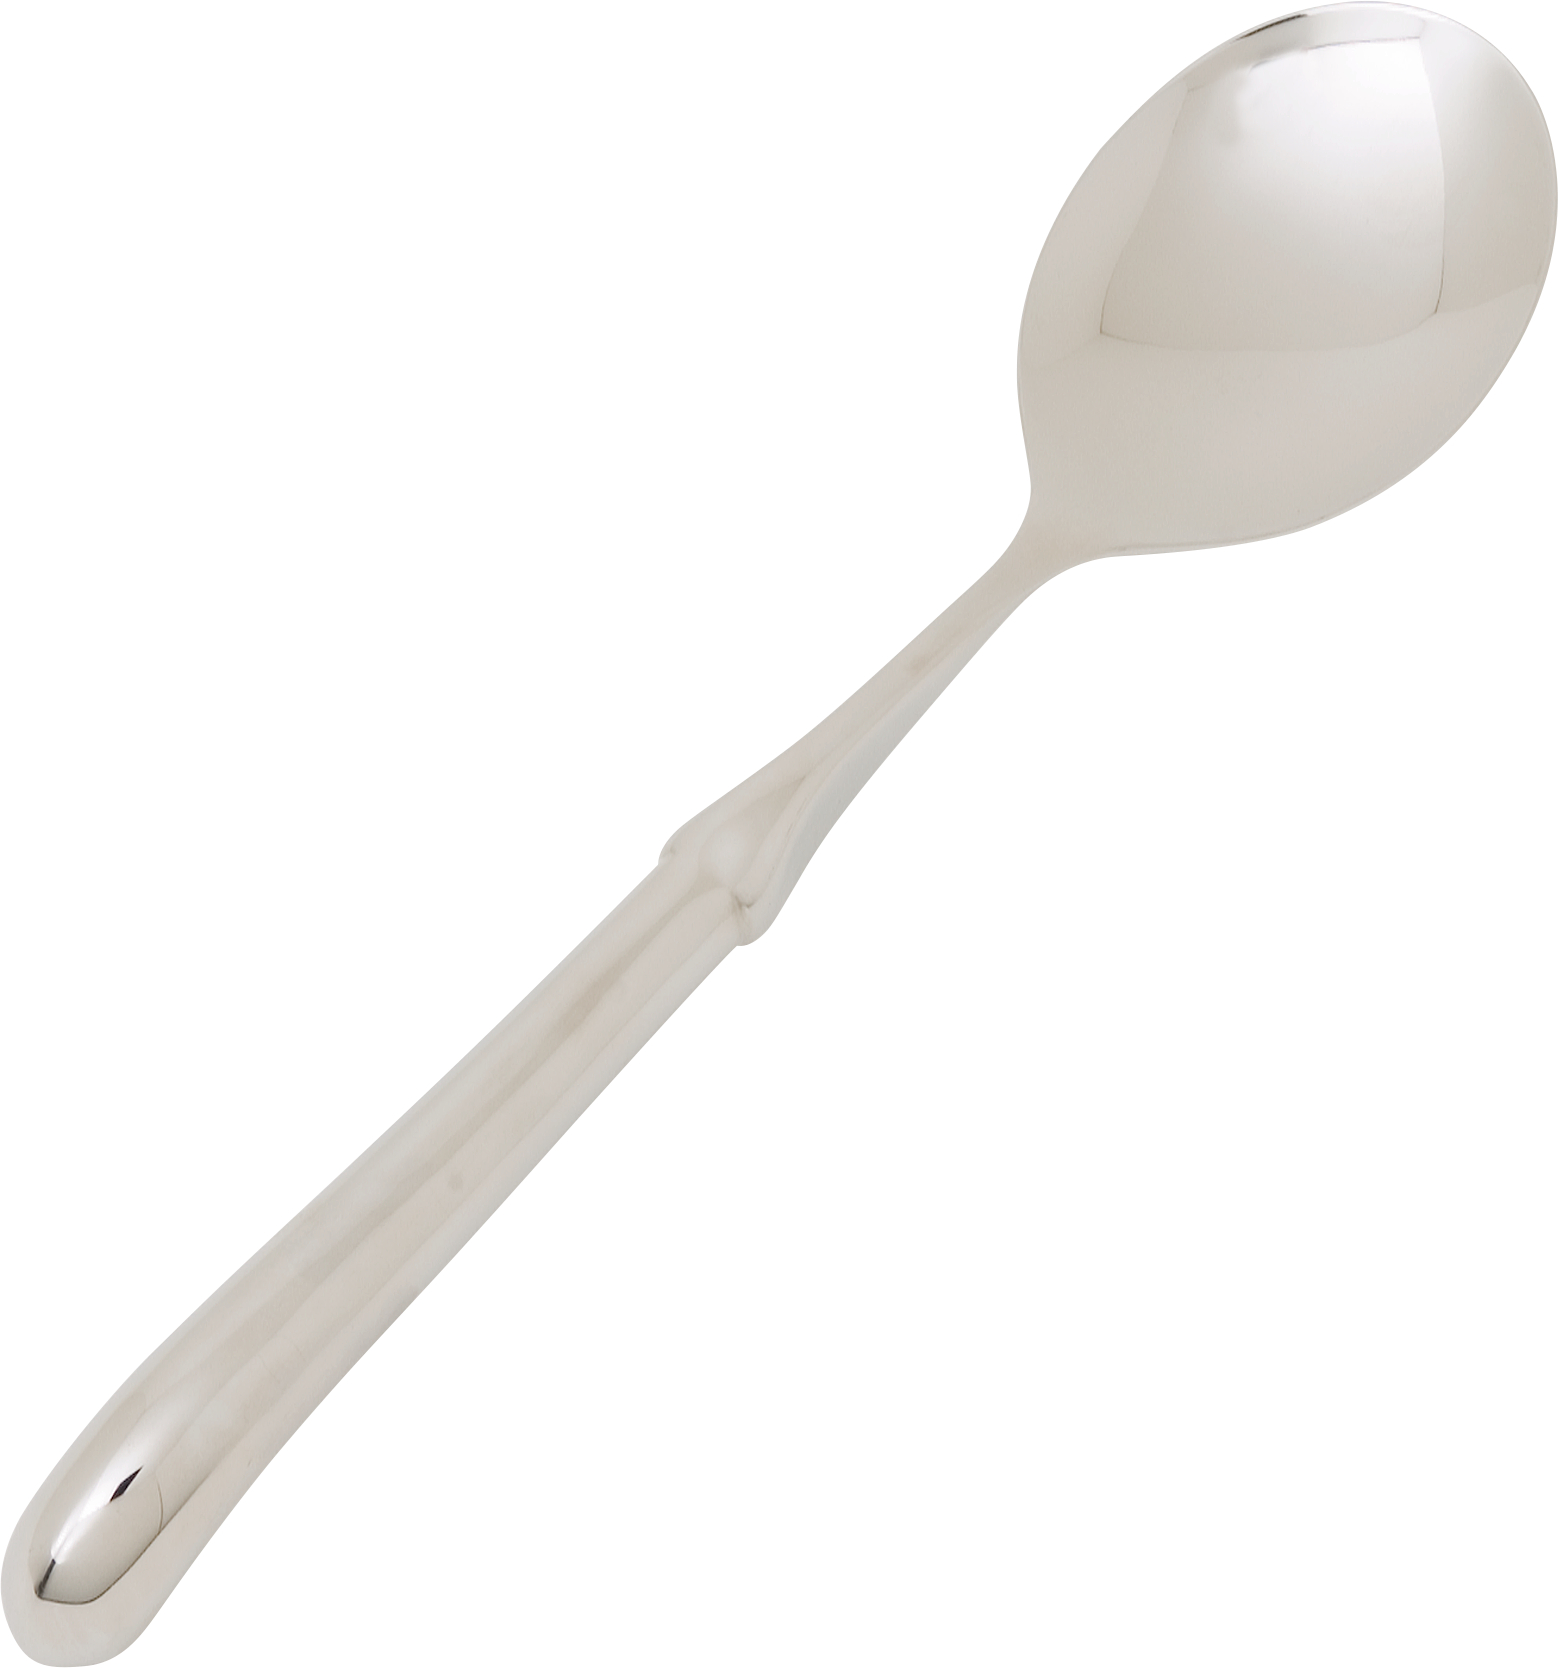 Venico Solid Spoon 11 - Stainless Steel